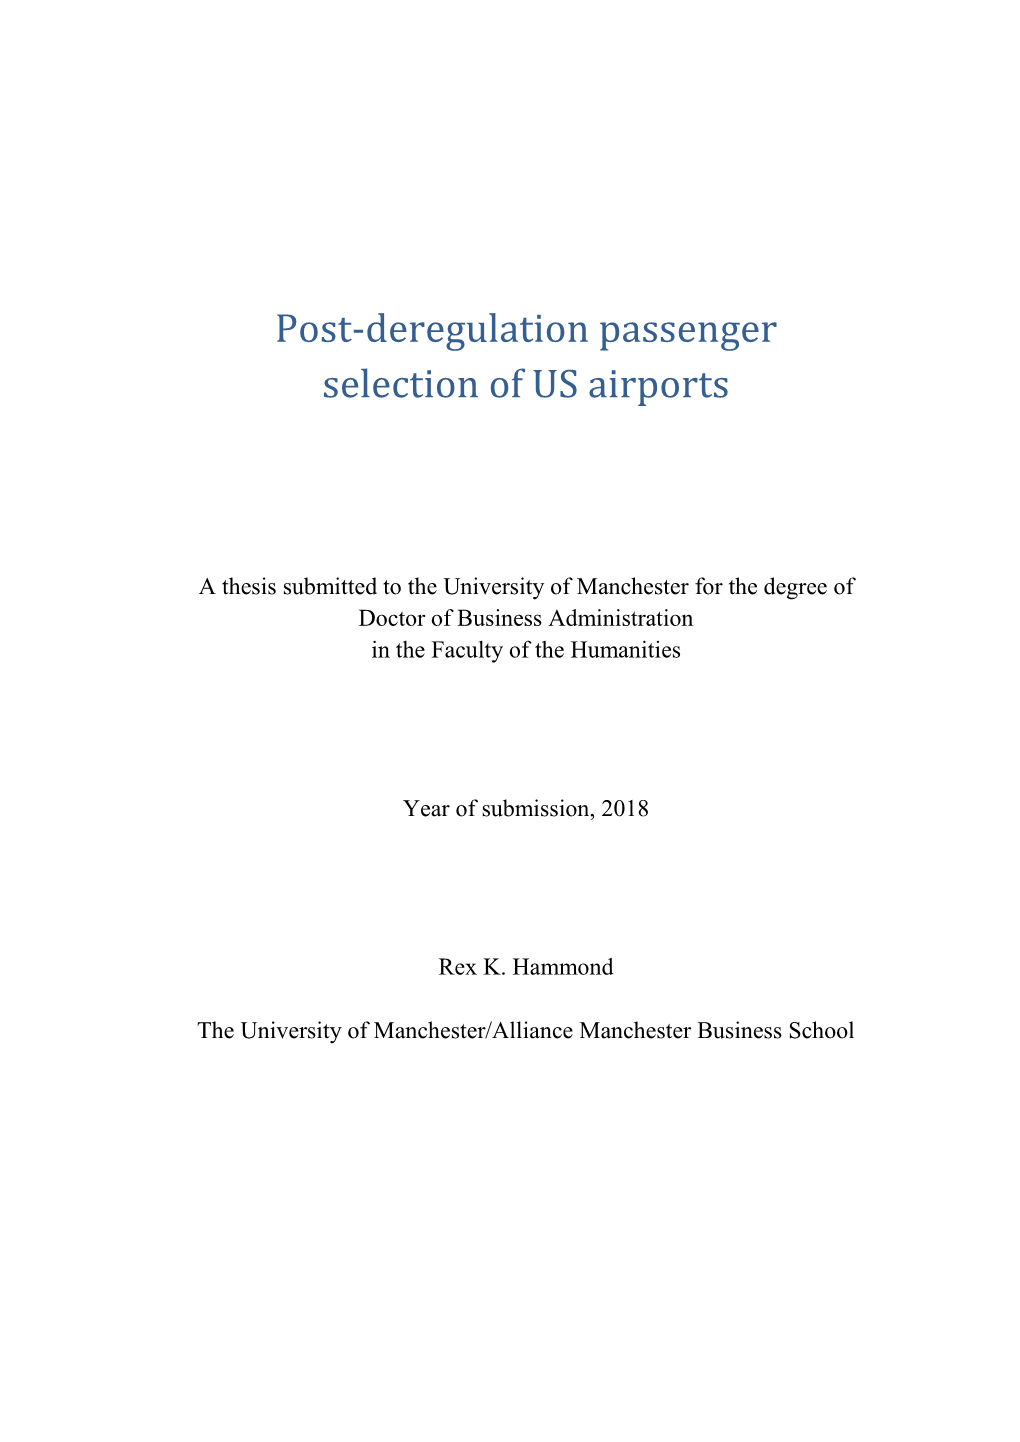 Post-Deregulation Passenger Selection of US Airports